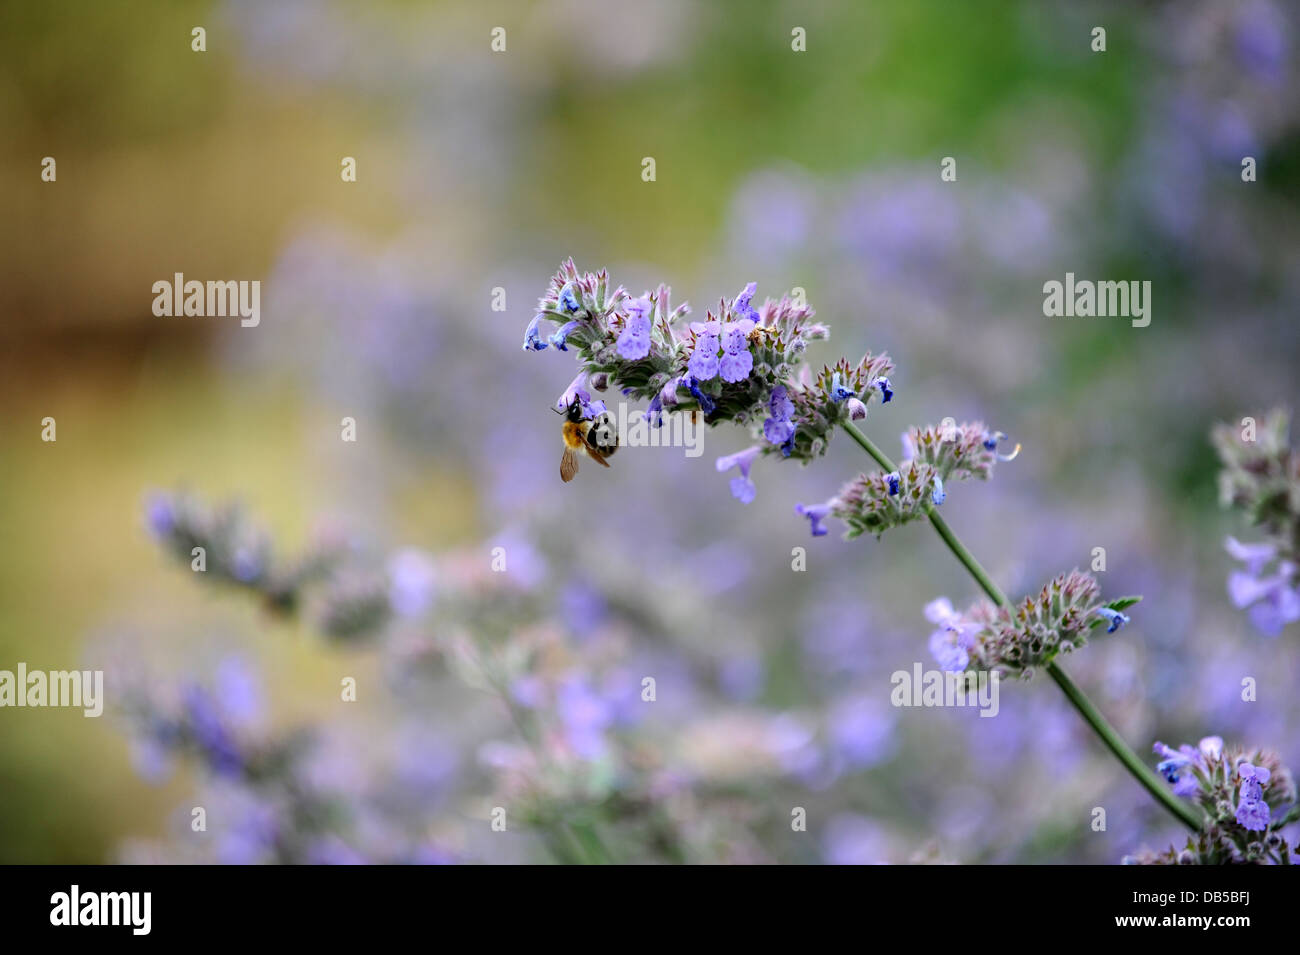 A bee pollinating a lavender plant Stock Photo